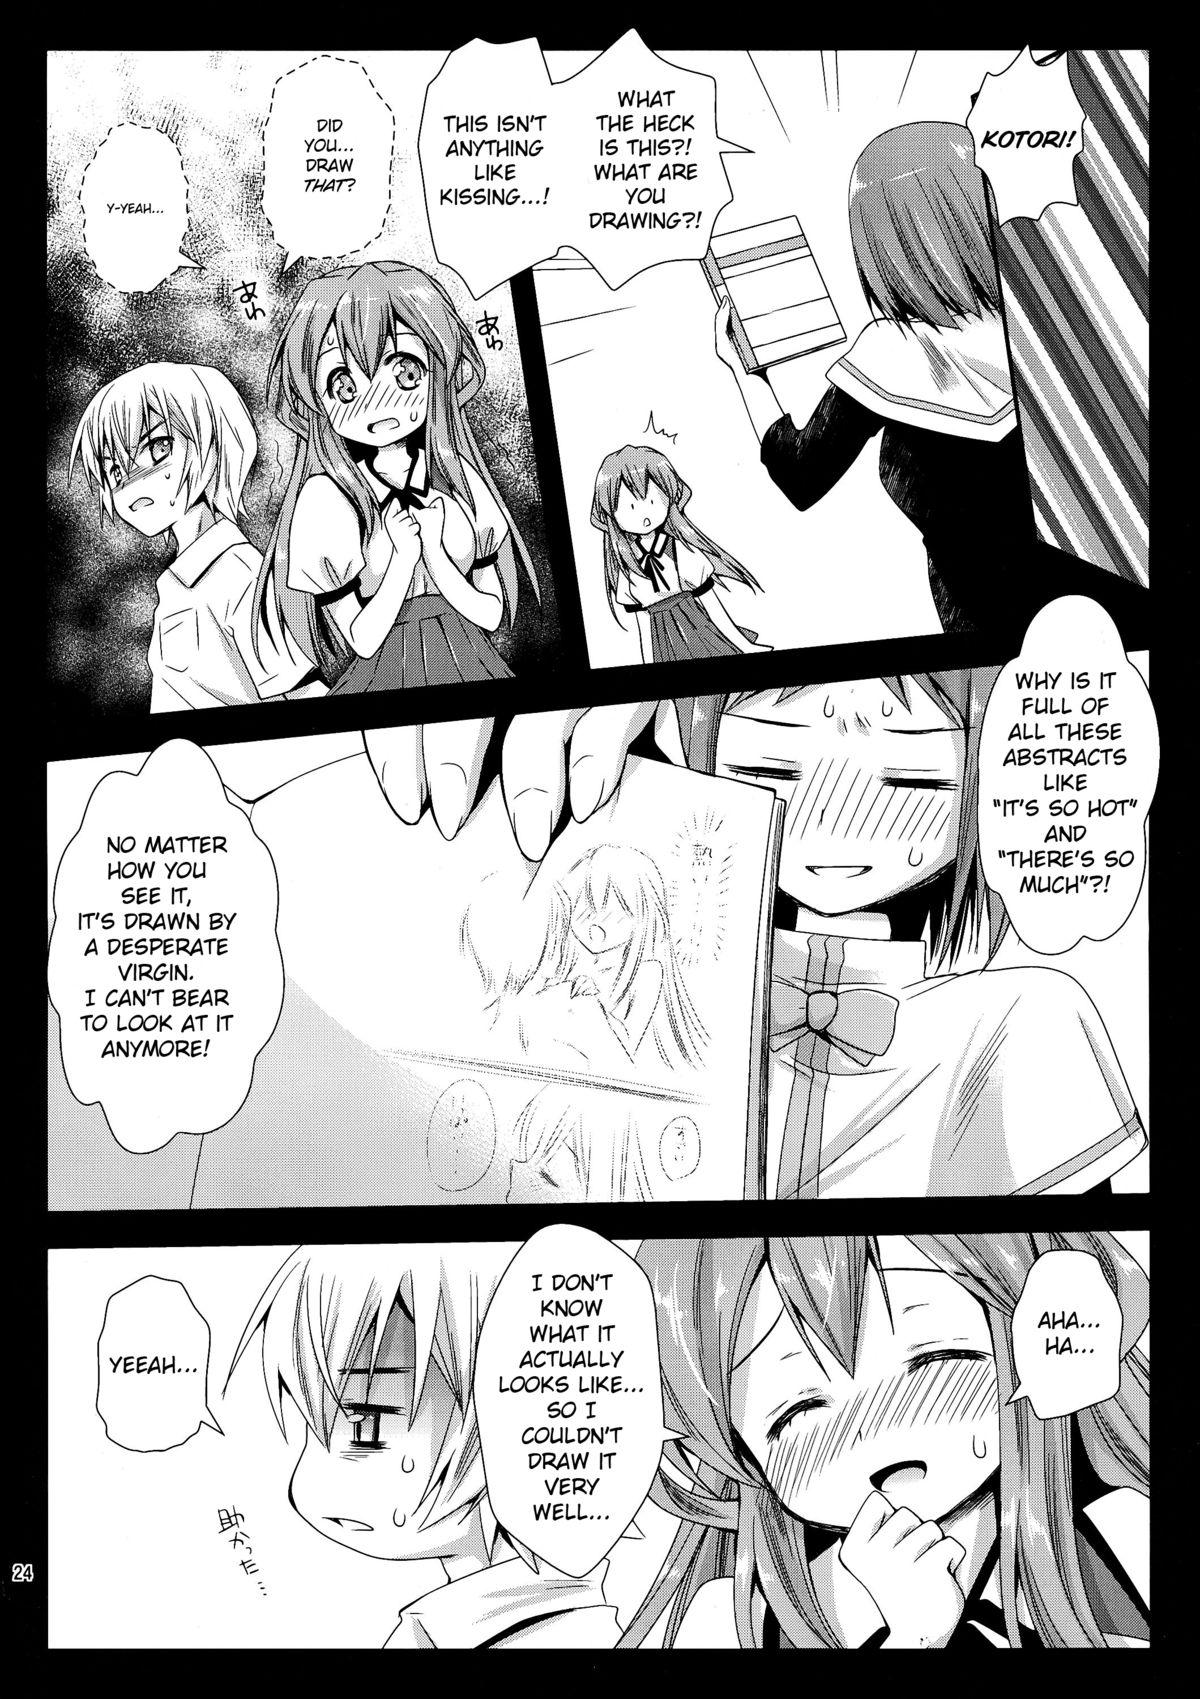 Blackcocks Kotori Hang Up! - Brynhildr in the darkness Amateur Vids - Page 24